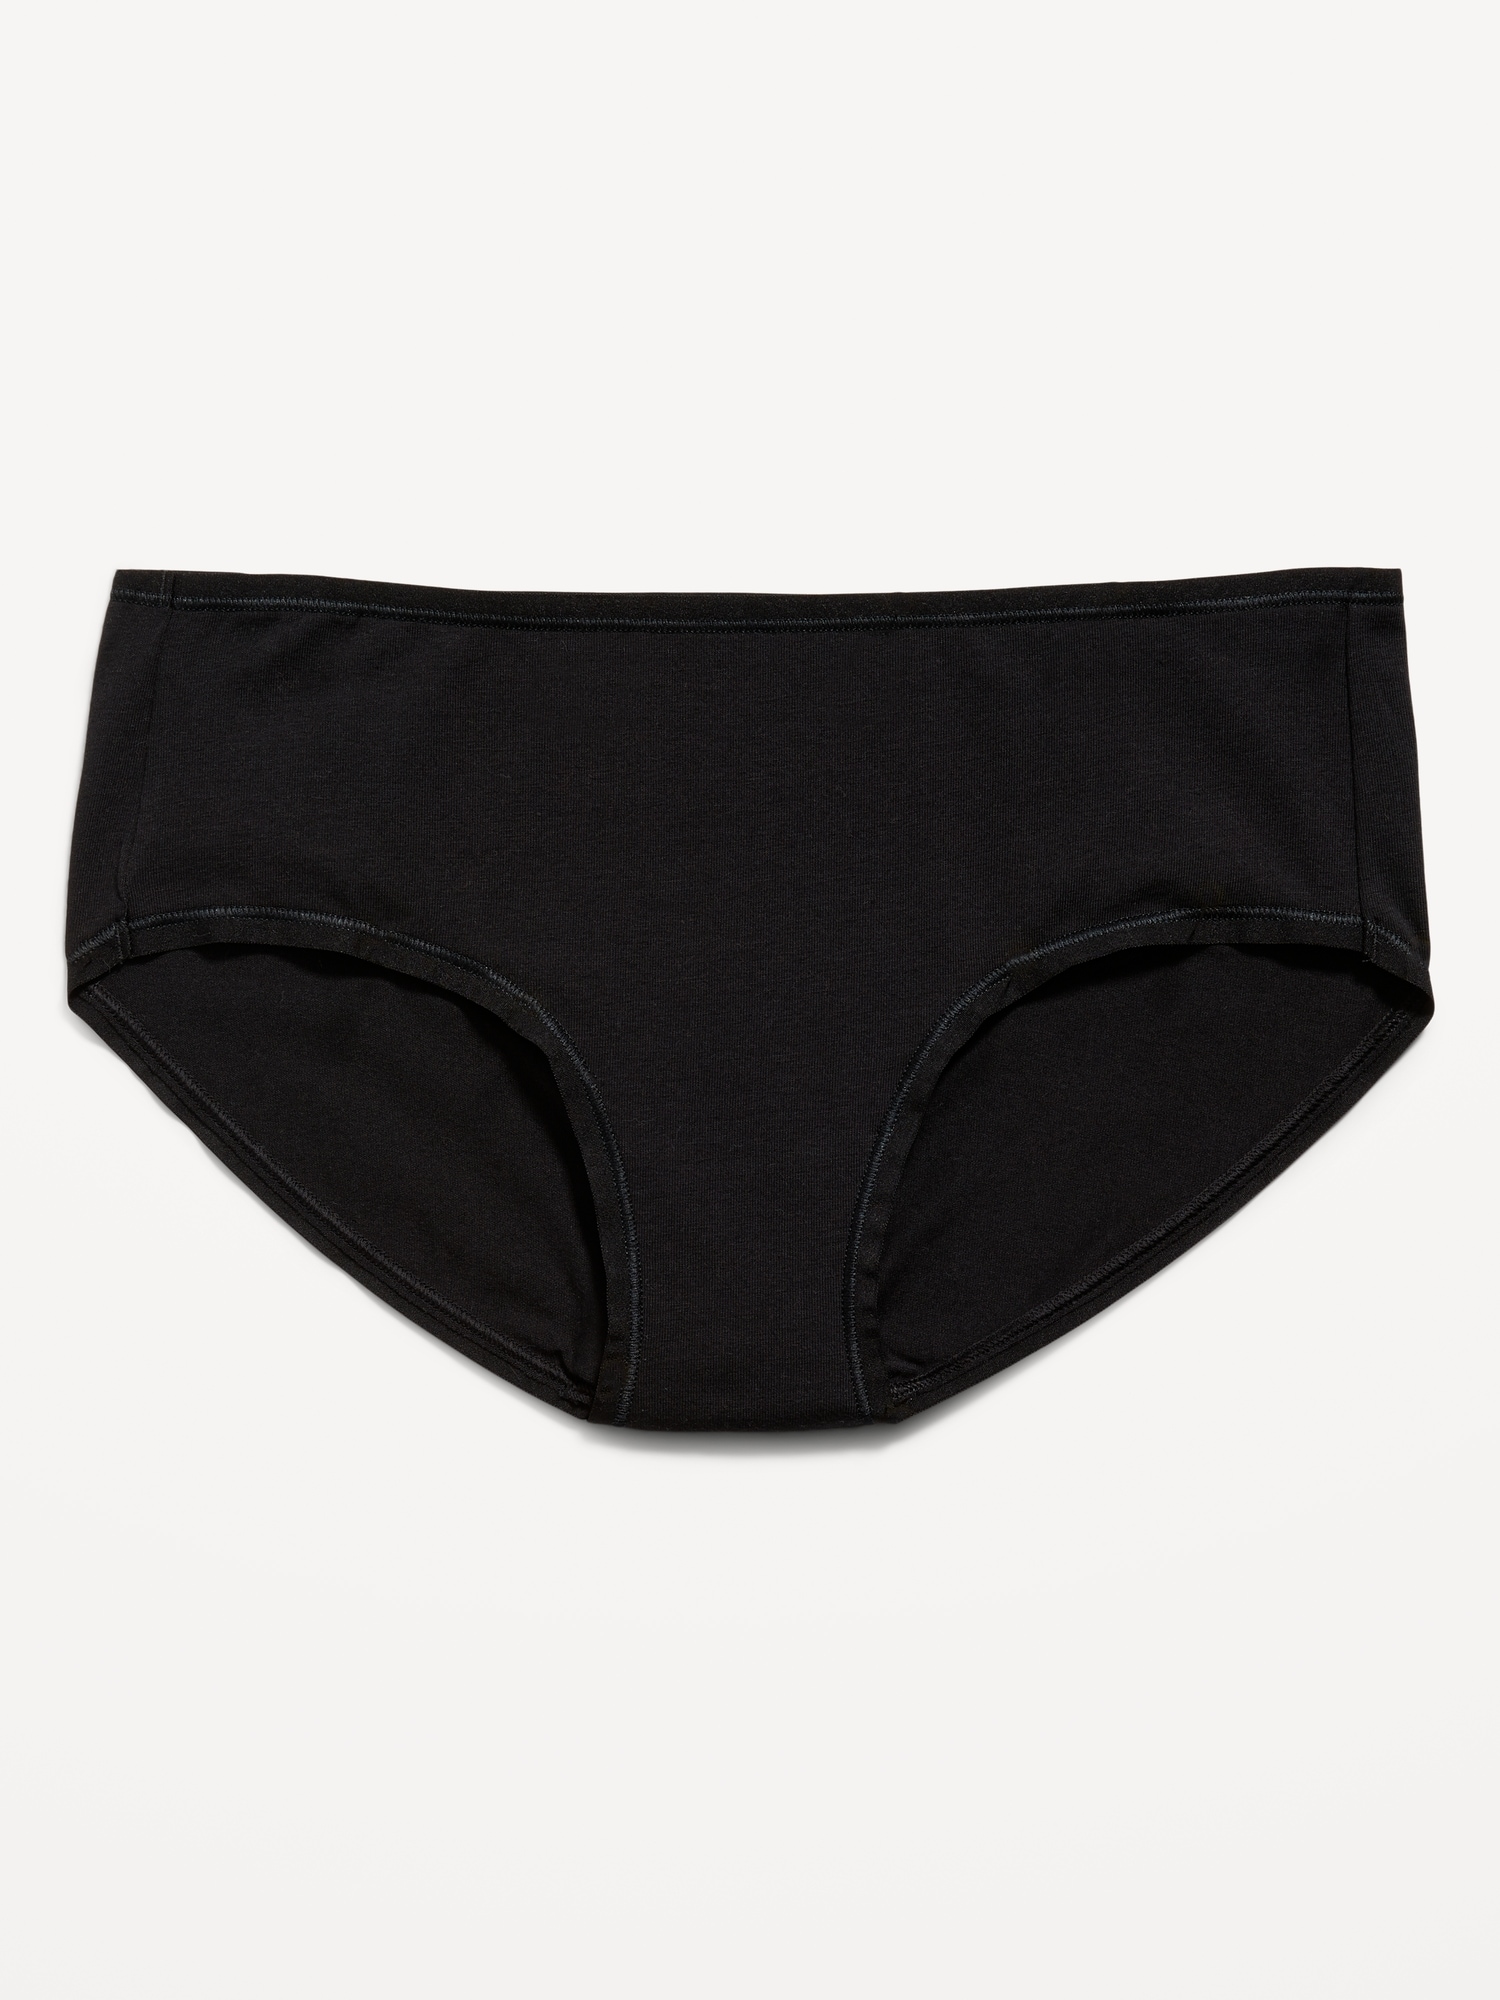 Old Navy Mid-Rise Classic Hipster Underwear for Women black. 1